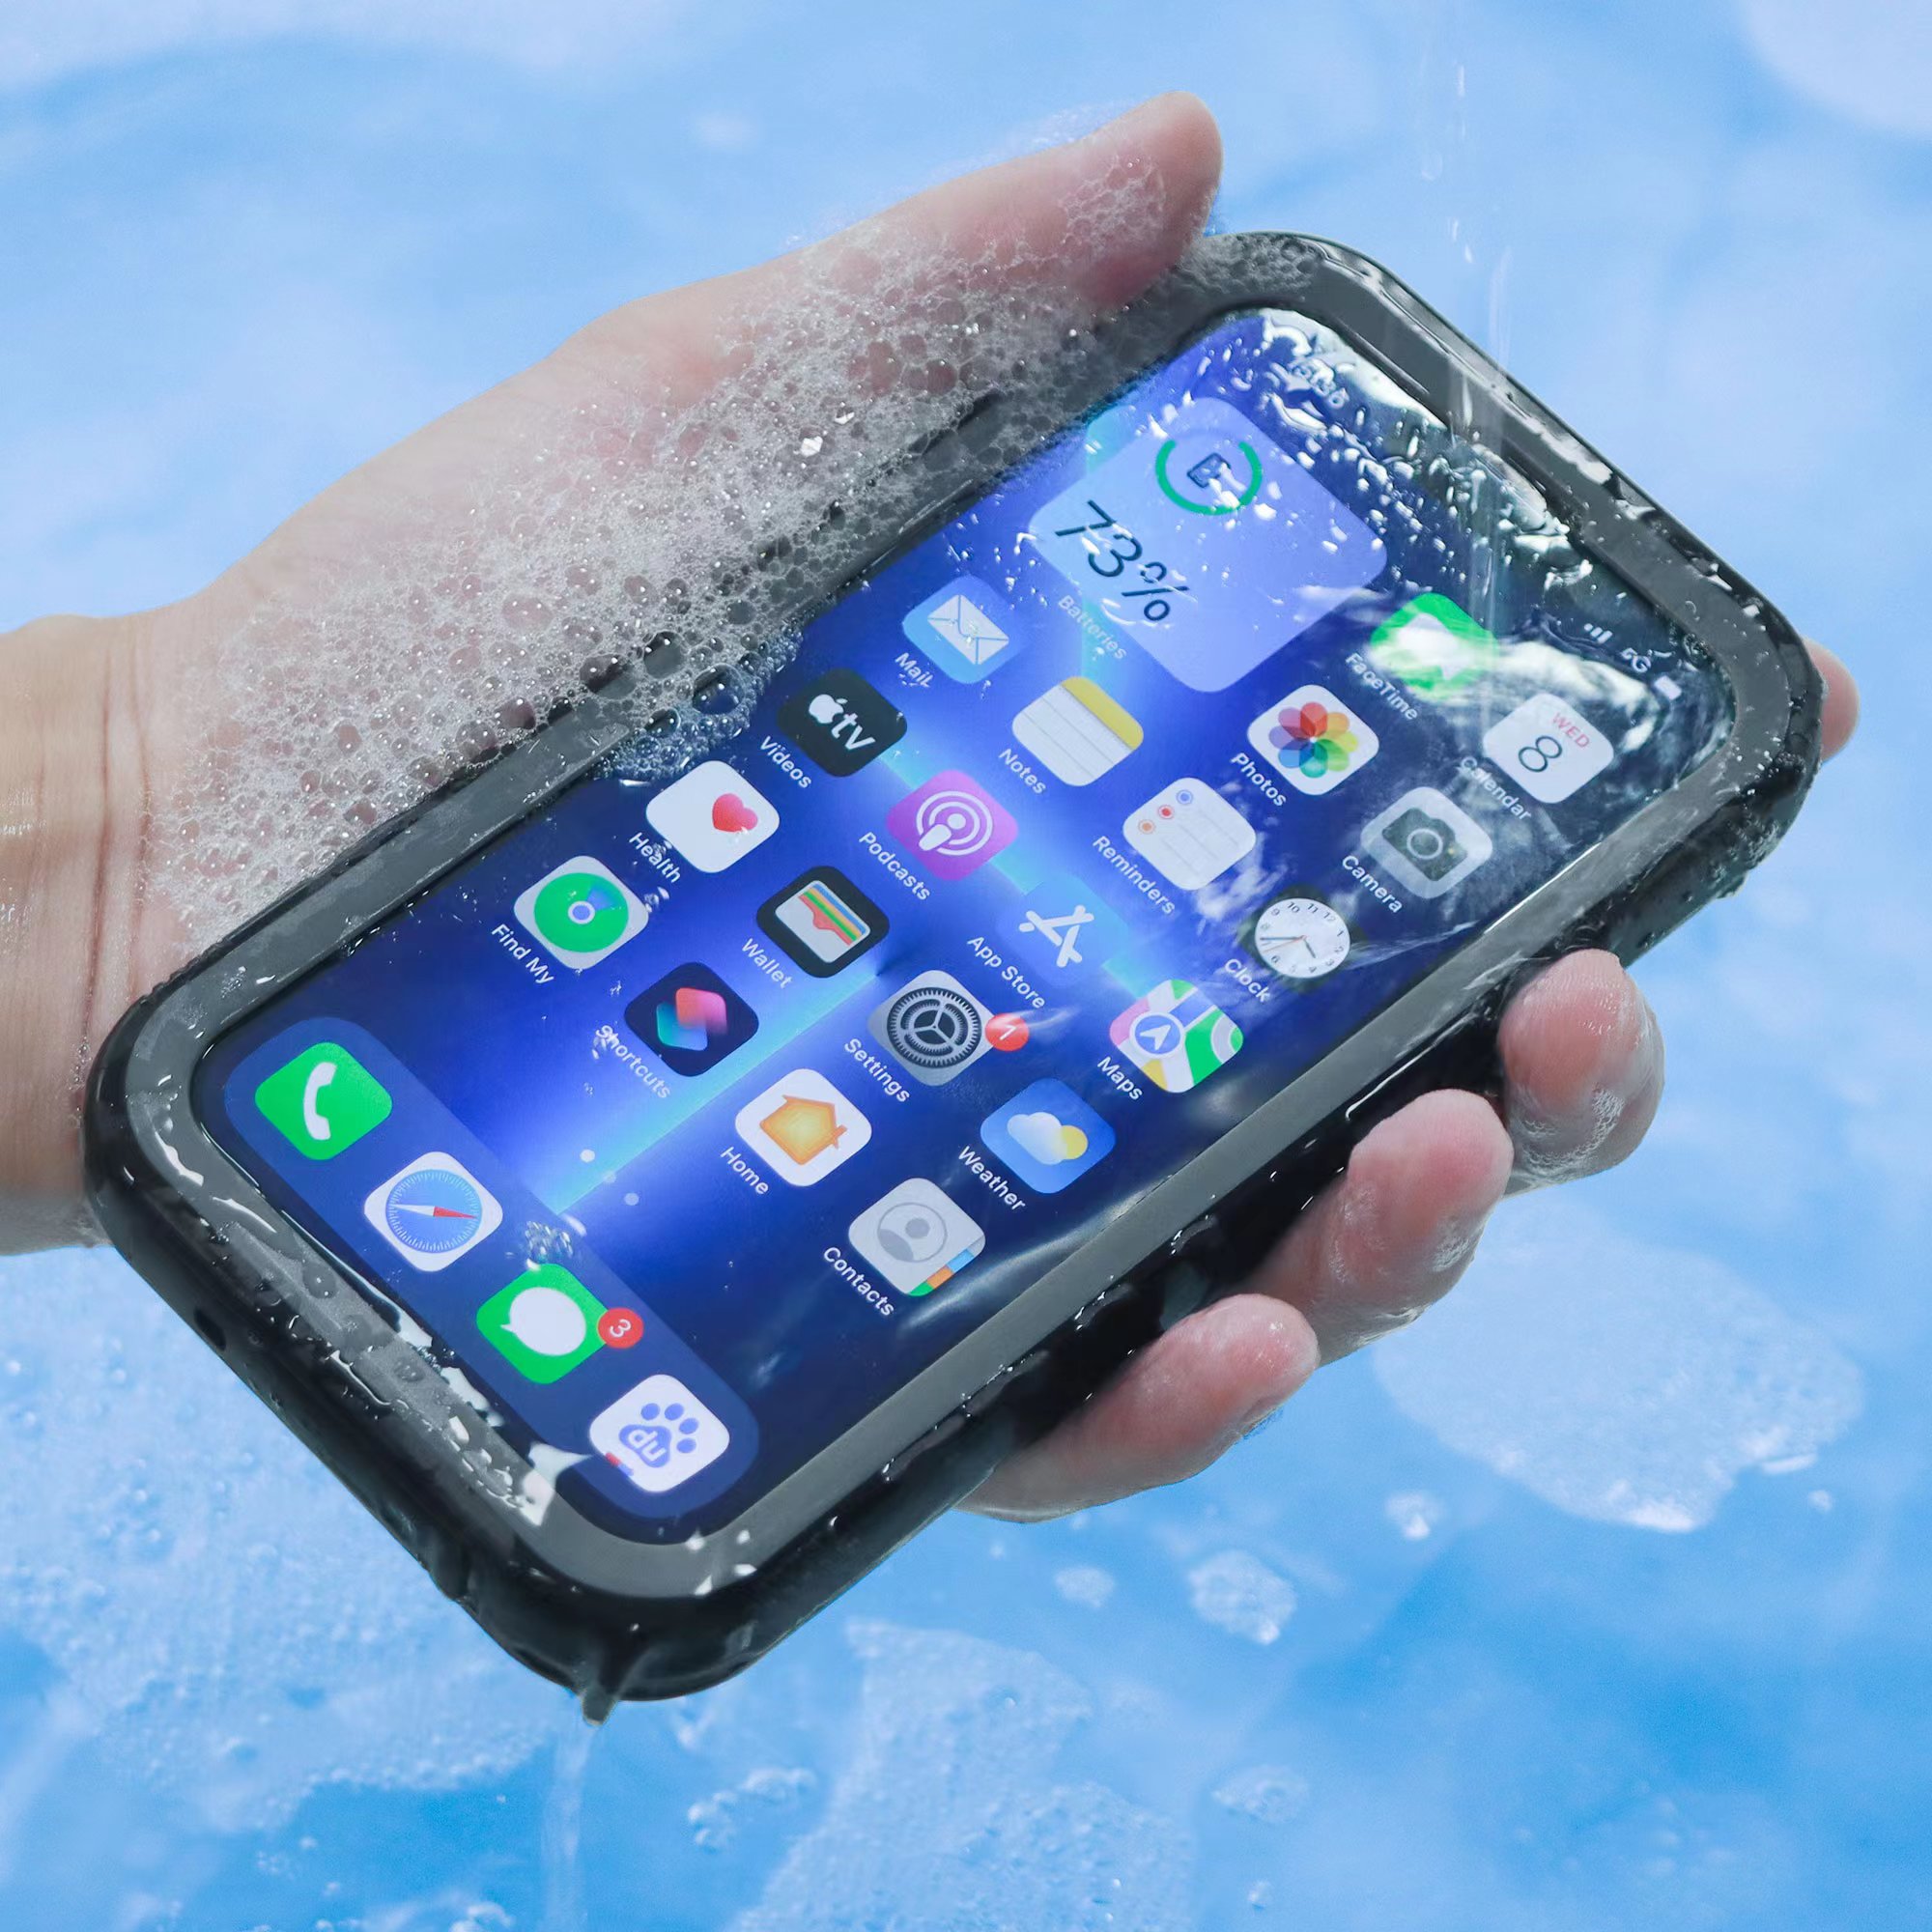 my-iphone-is-already-waterproof-why-do-i-need-a-waterproof-case